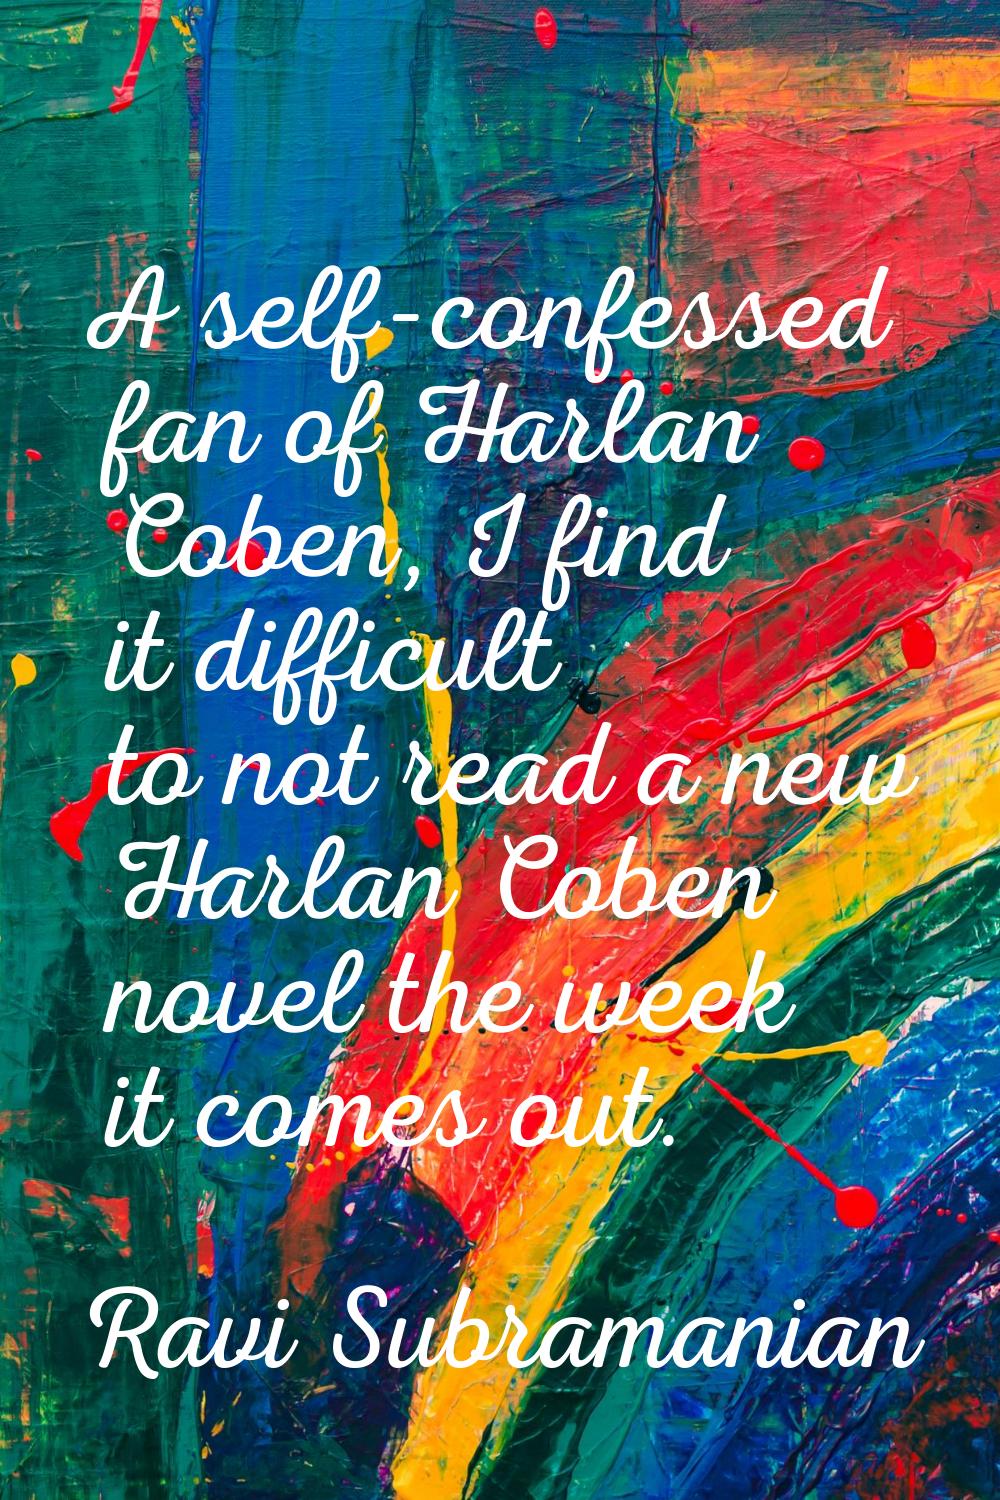 A self-confessed fan of Harlan Coben, I find it difficult to not read a new Harlan Coben novel the 